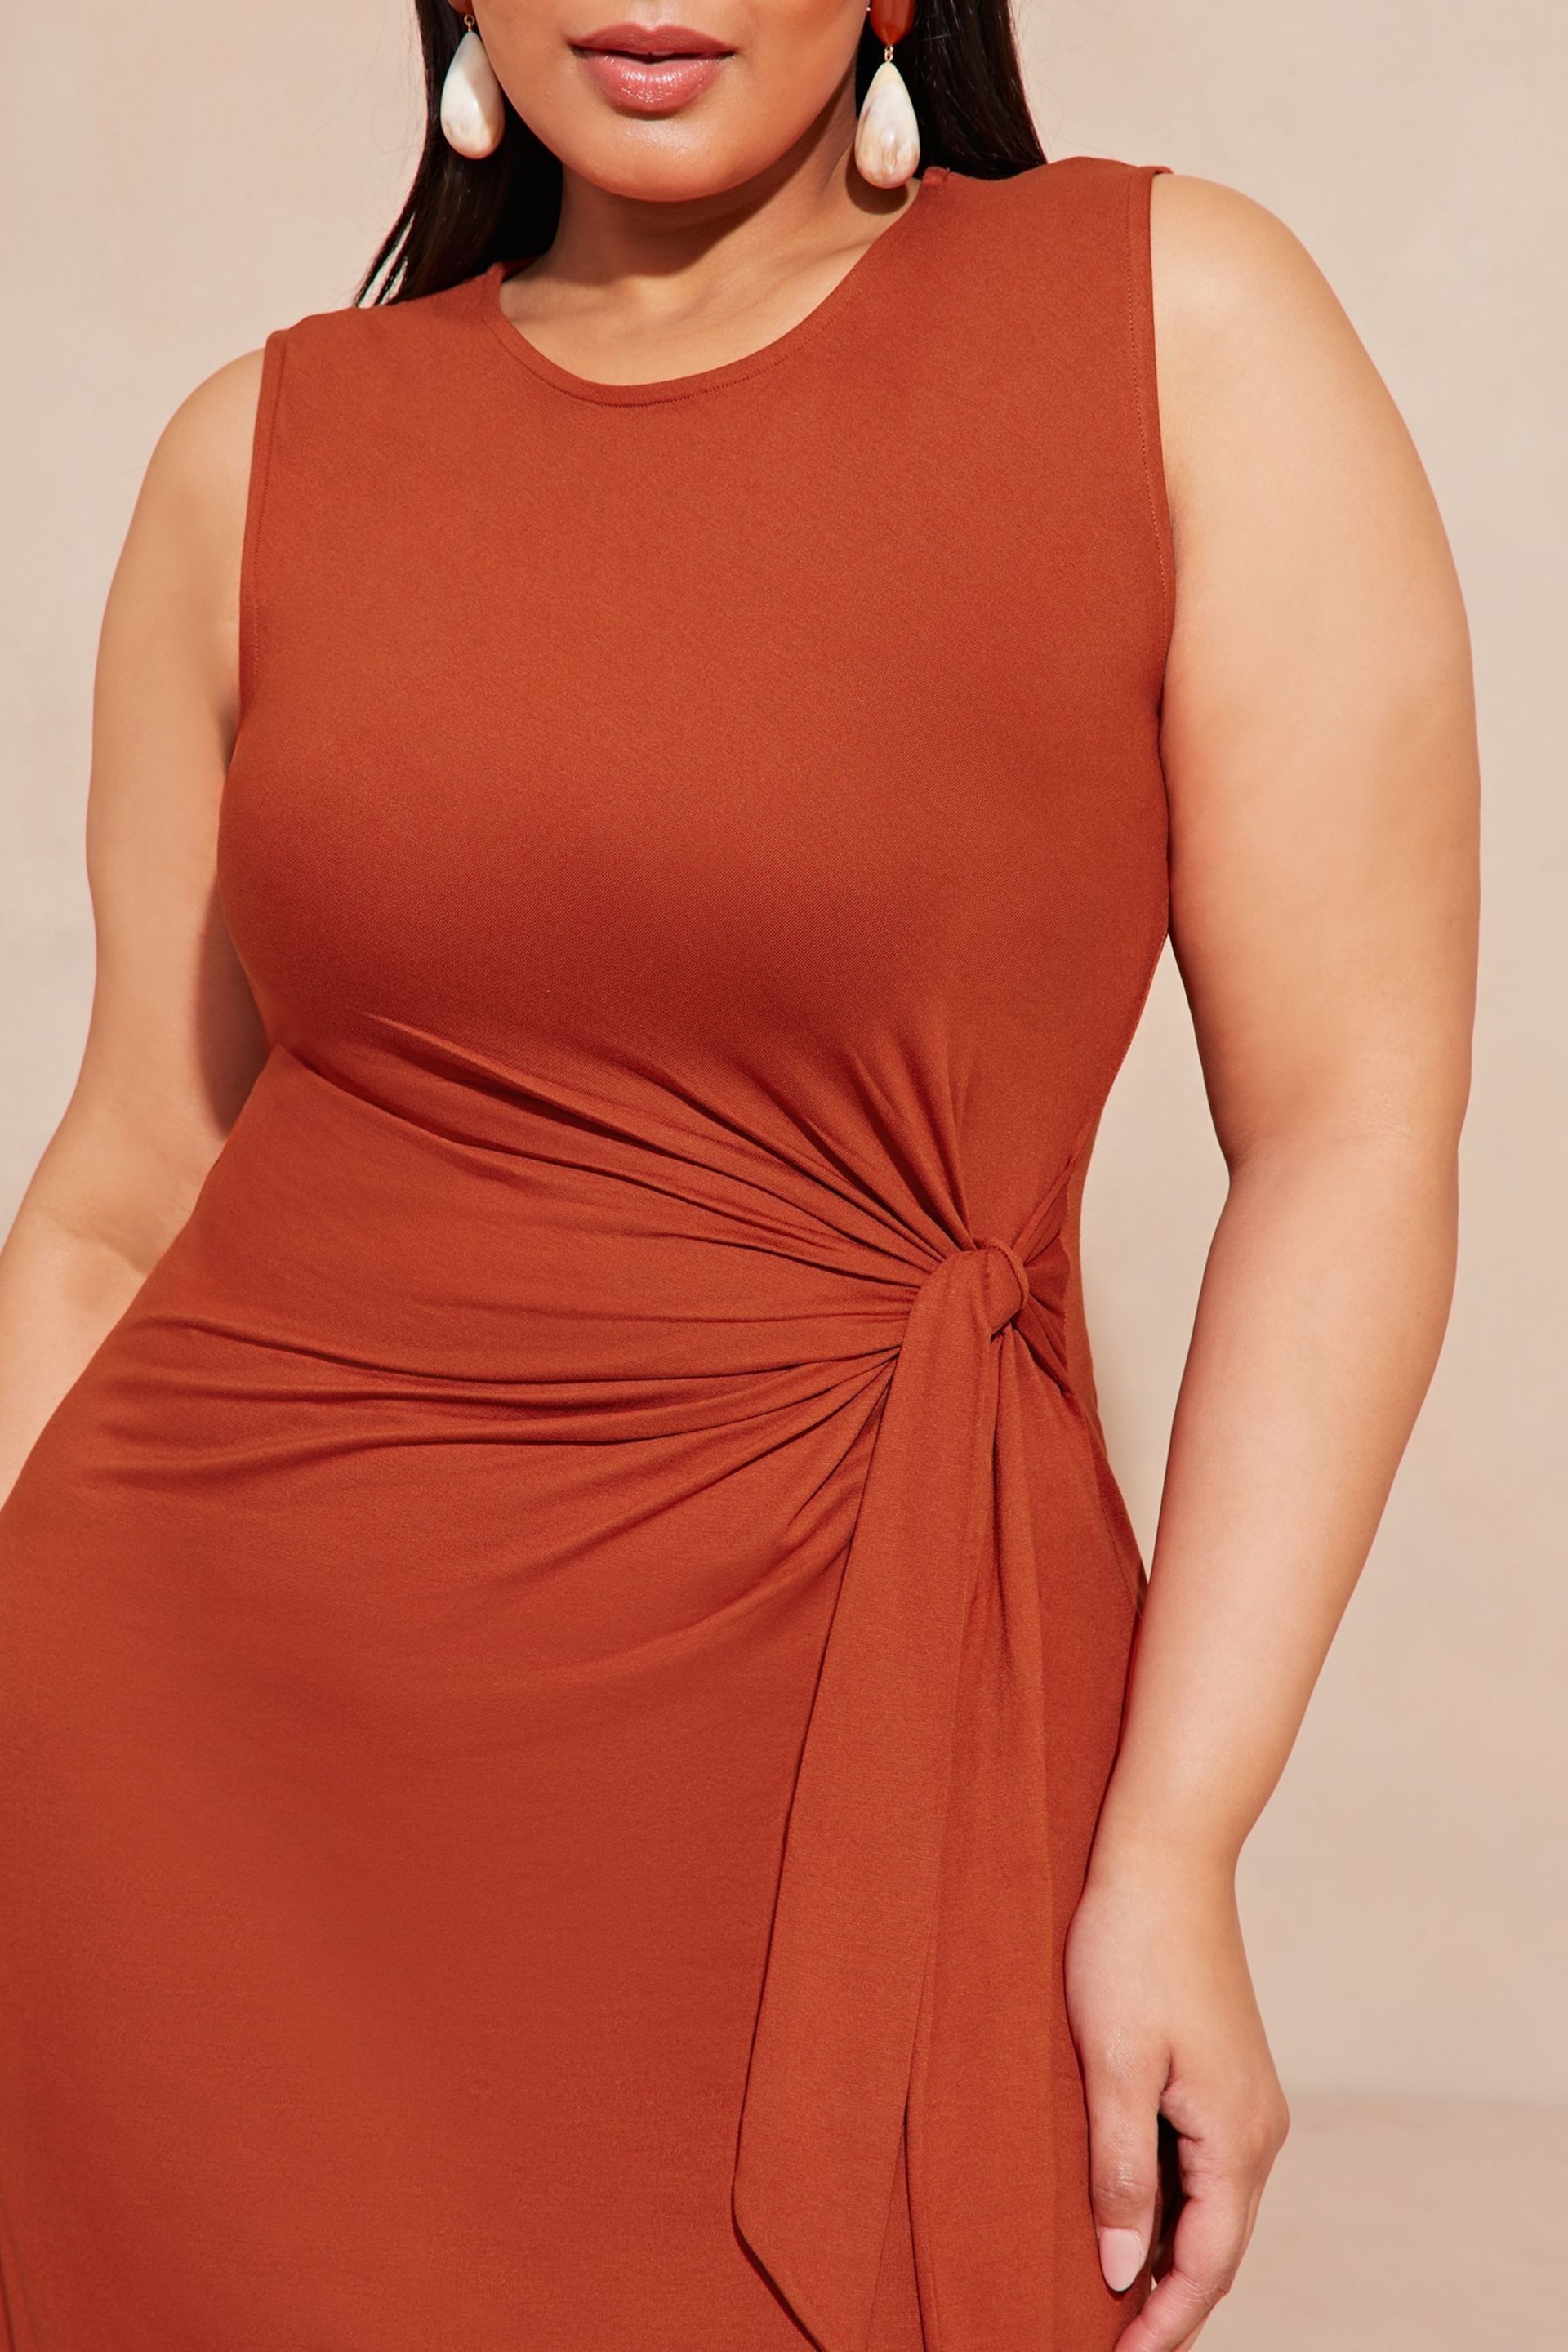 Lipsy Red Curve Sleeveless Racer Tie Side Jersey Midi Dress - Image 4 of 4